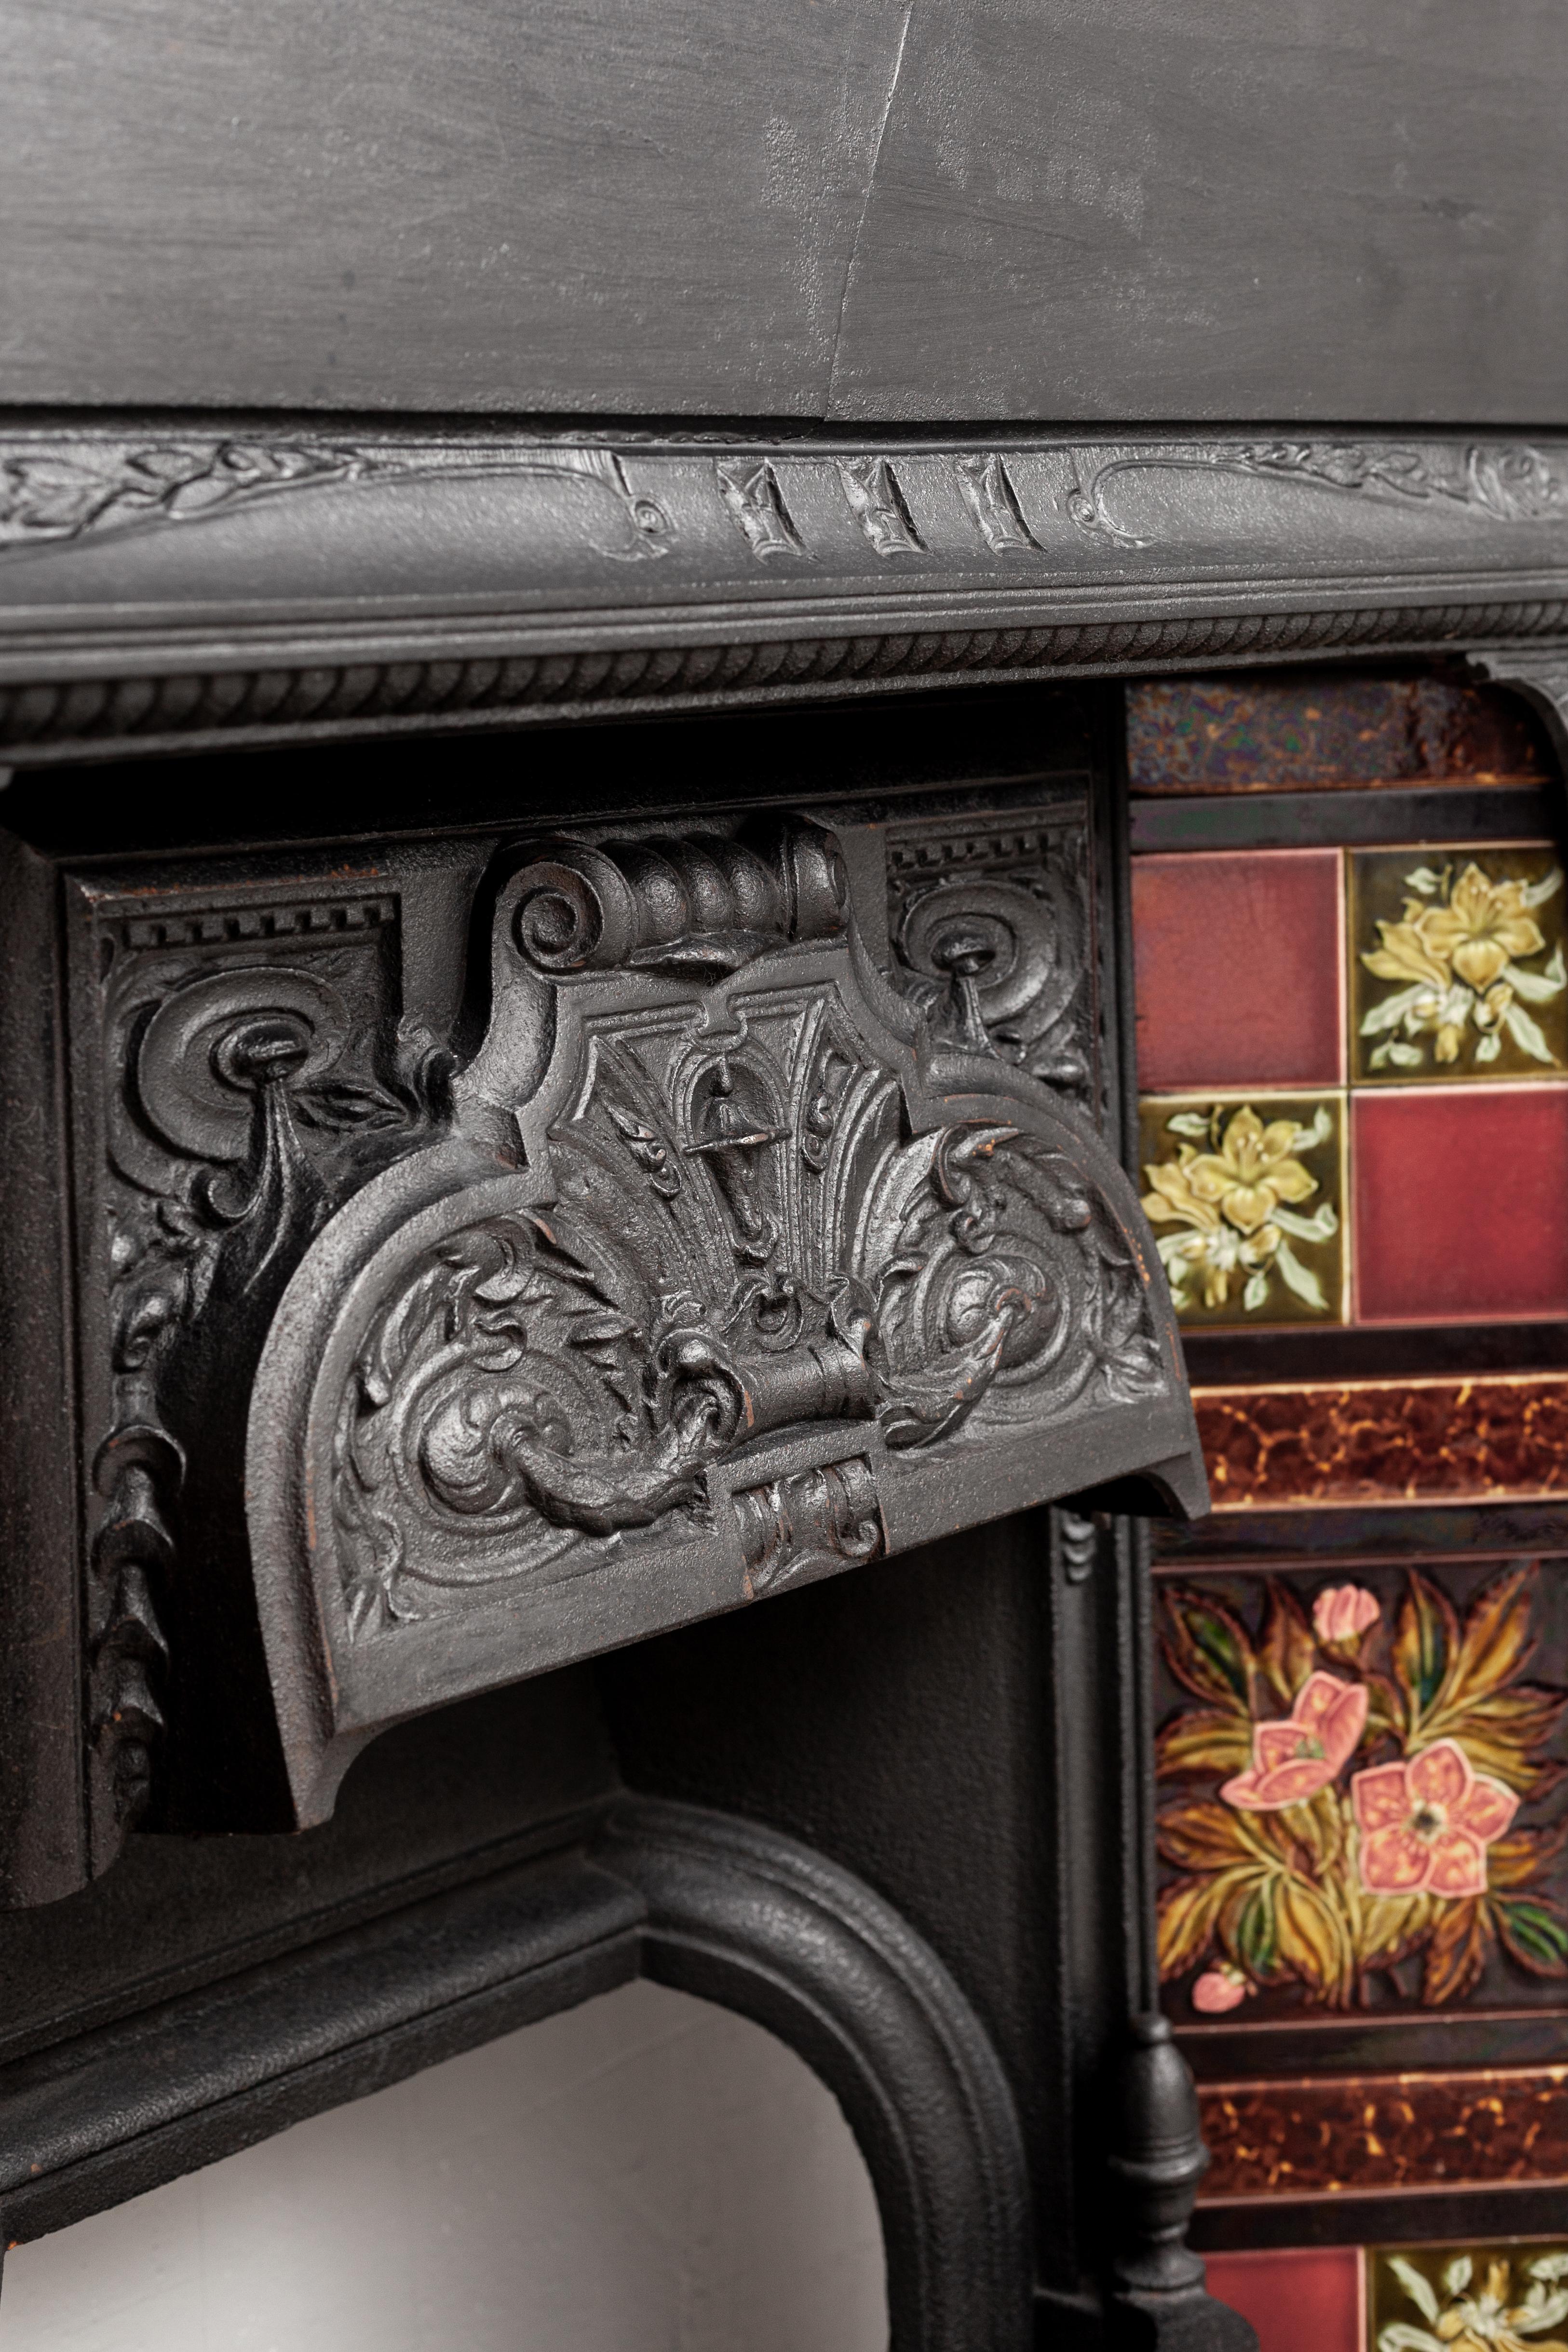 This typical English fireplace is characterized by the beautiful cast iron, with original tiles in it. A built-in fire of this level can be built into a sleek wall or in combination with a classic fireplace. With this fireplace, you also have the